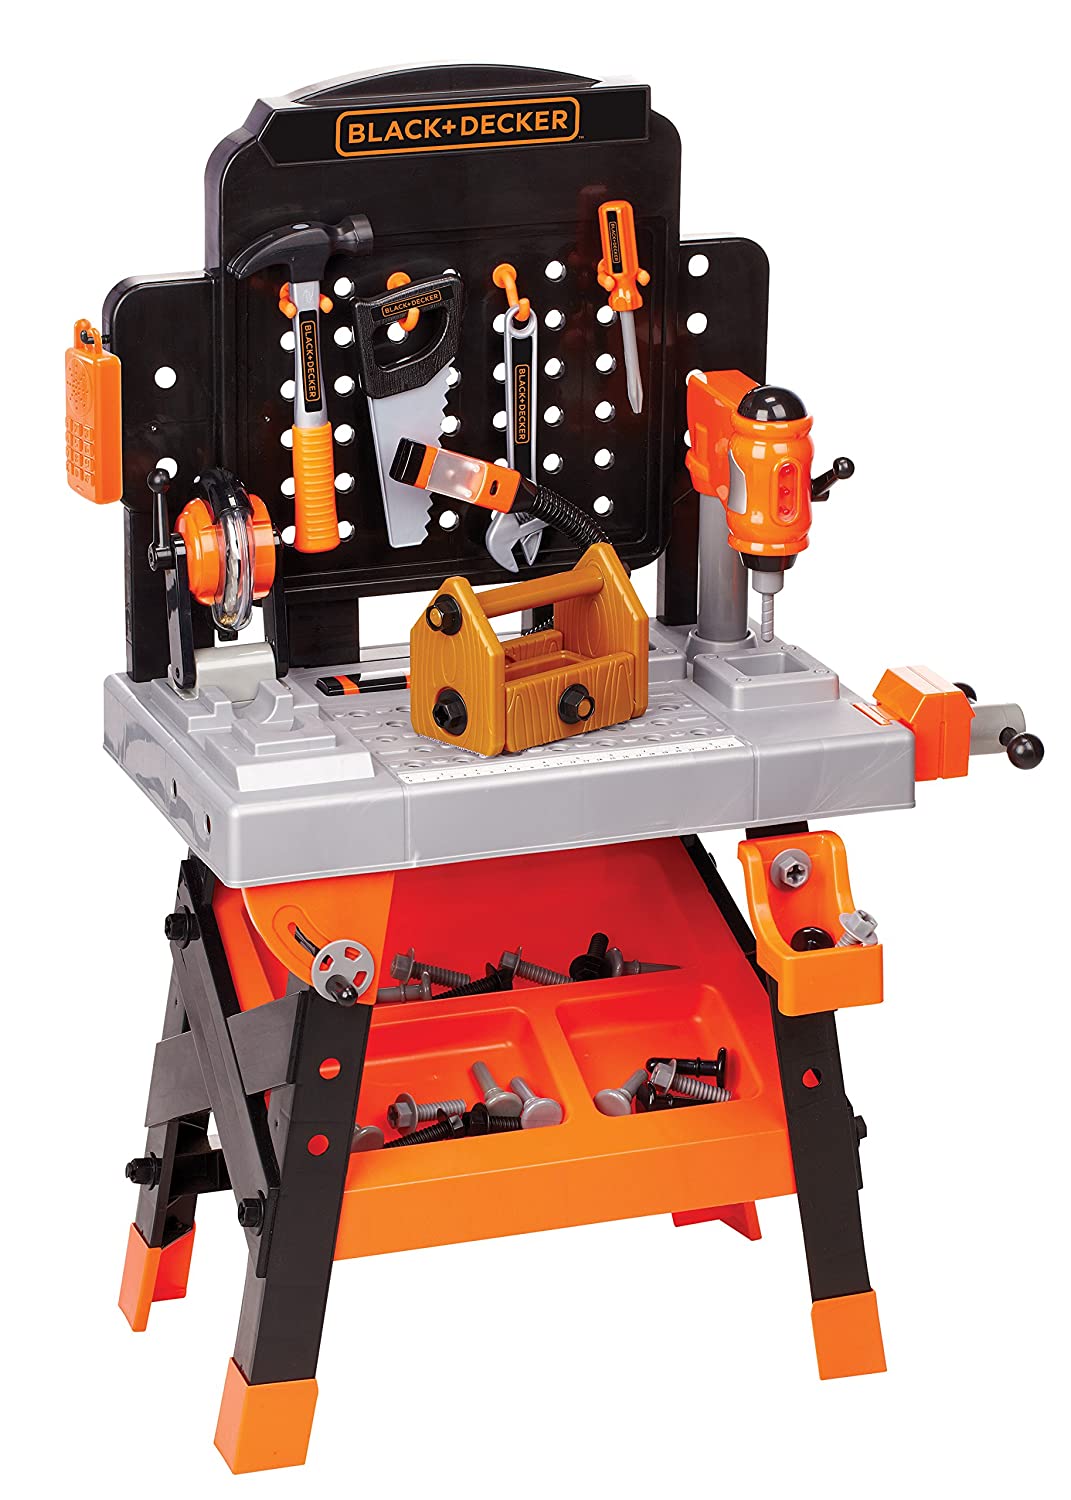 Top 9 Best Kids Toy Tool Bench Reviews in 2022 1